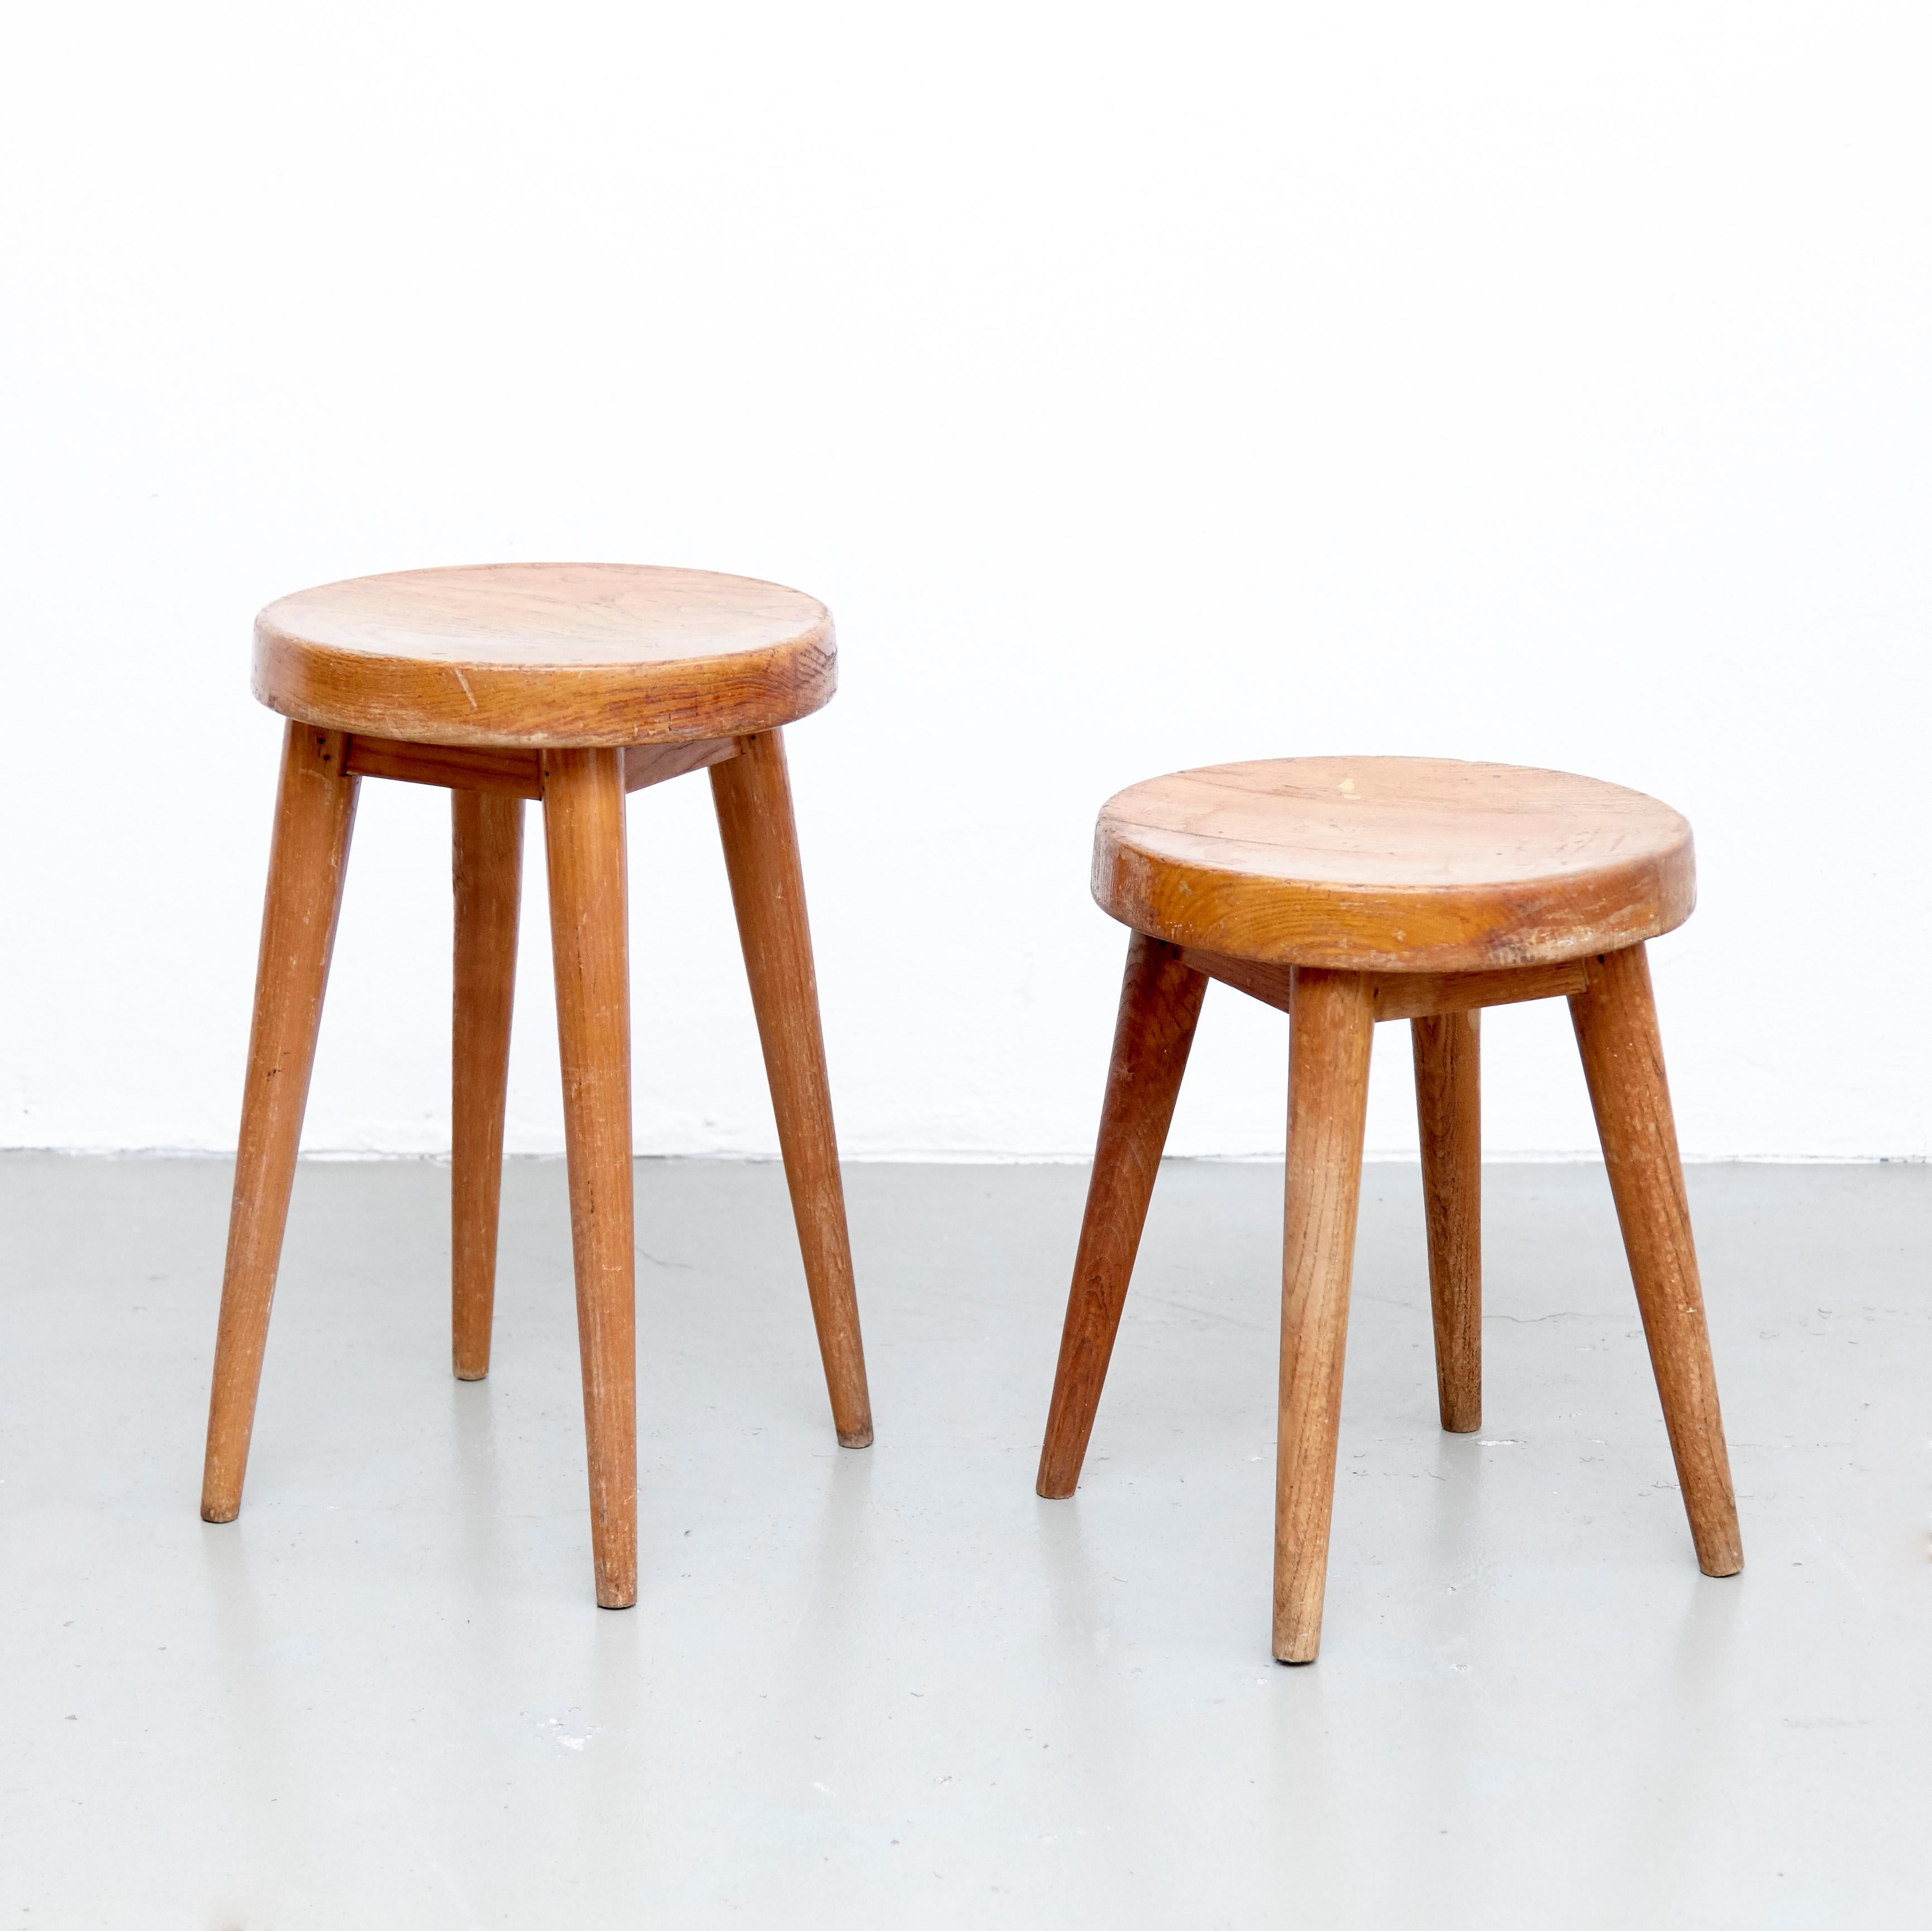 Stools designed by Charlotte Perriand & Pierre Jeanneret from the hotel 